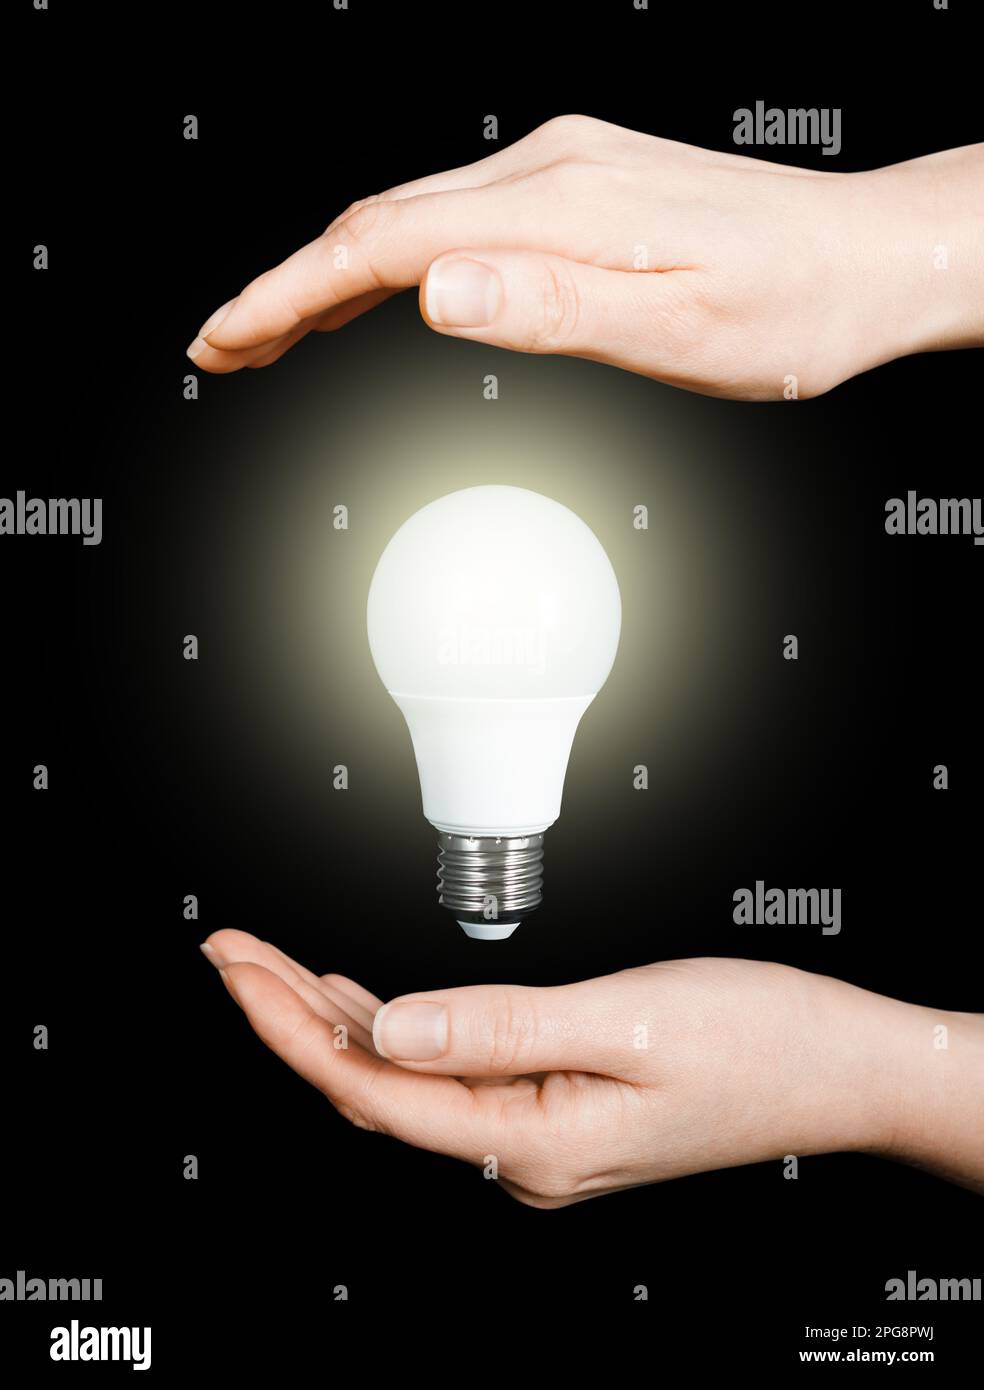 glowing led light bulb in hands of woman on black background, energy saving, global economy concept, electricity problems, power outages due to destru Stock Photo